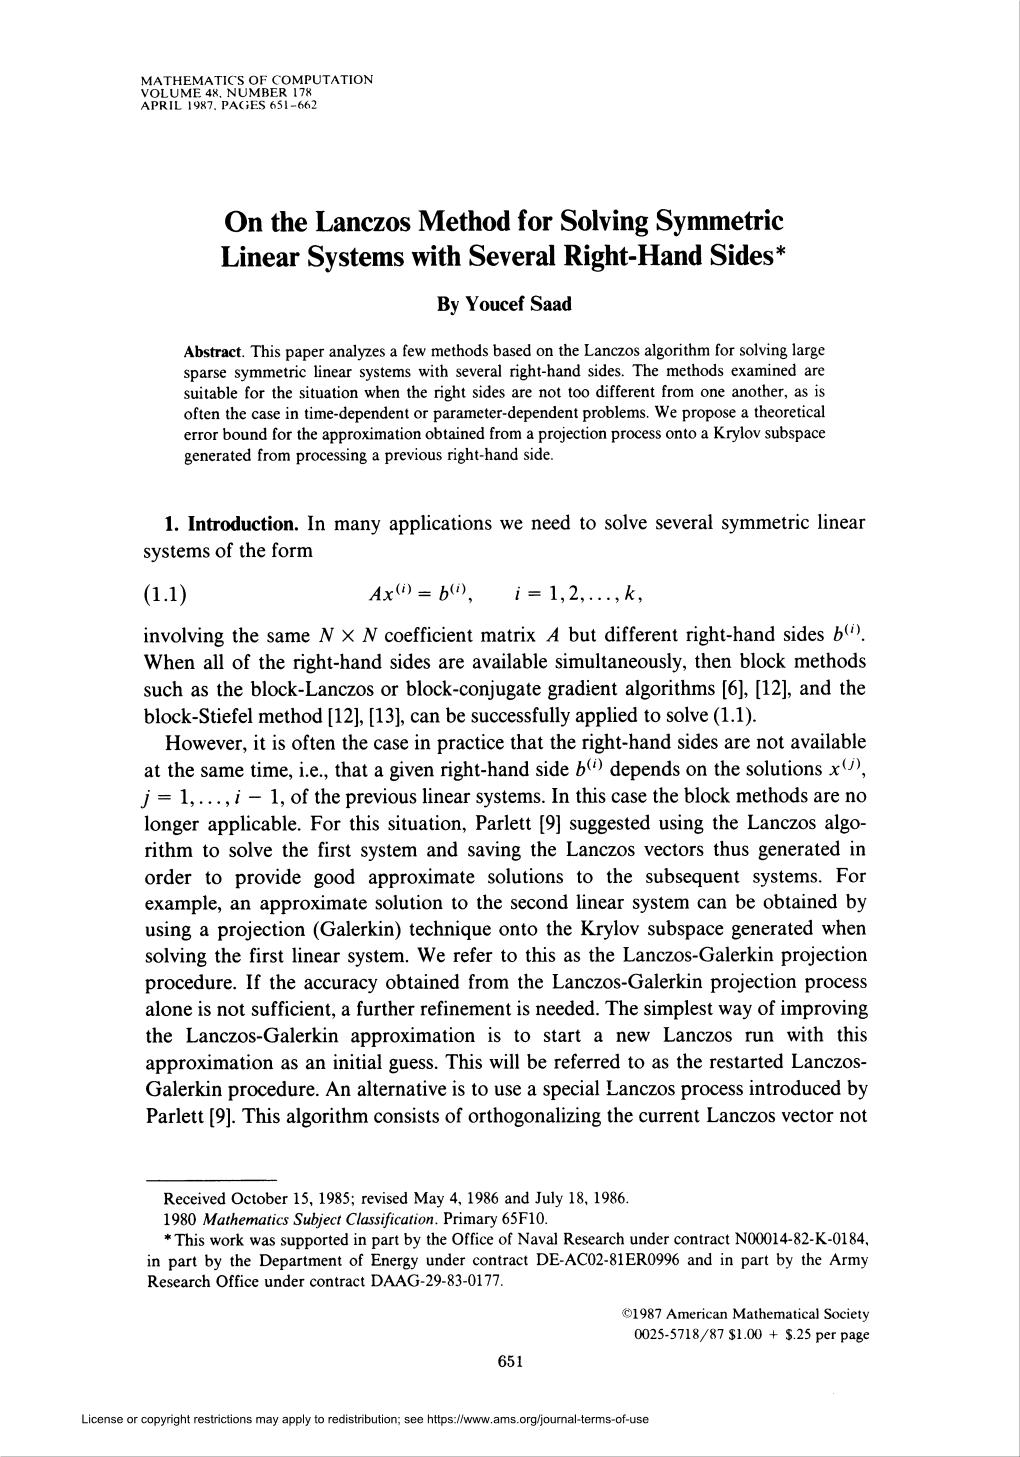 On the Lanczos Method for Solving Symmetric Linear Systems with Several Right-Hand Sides*